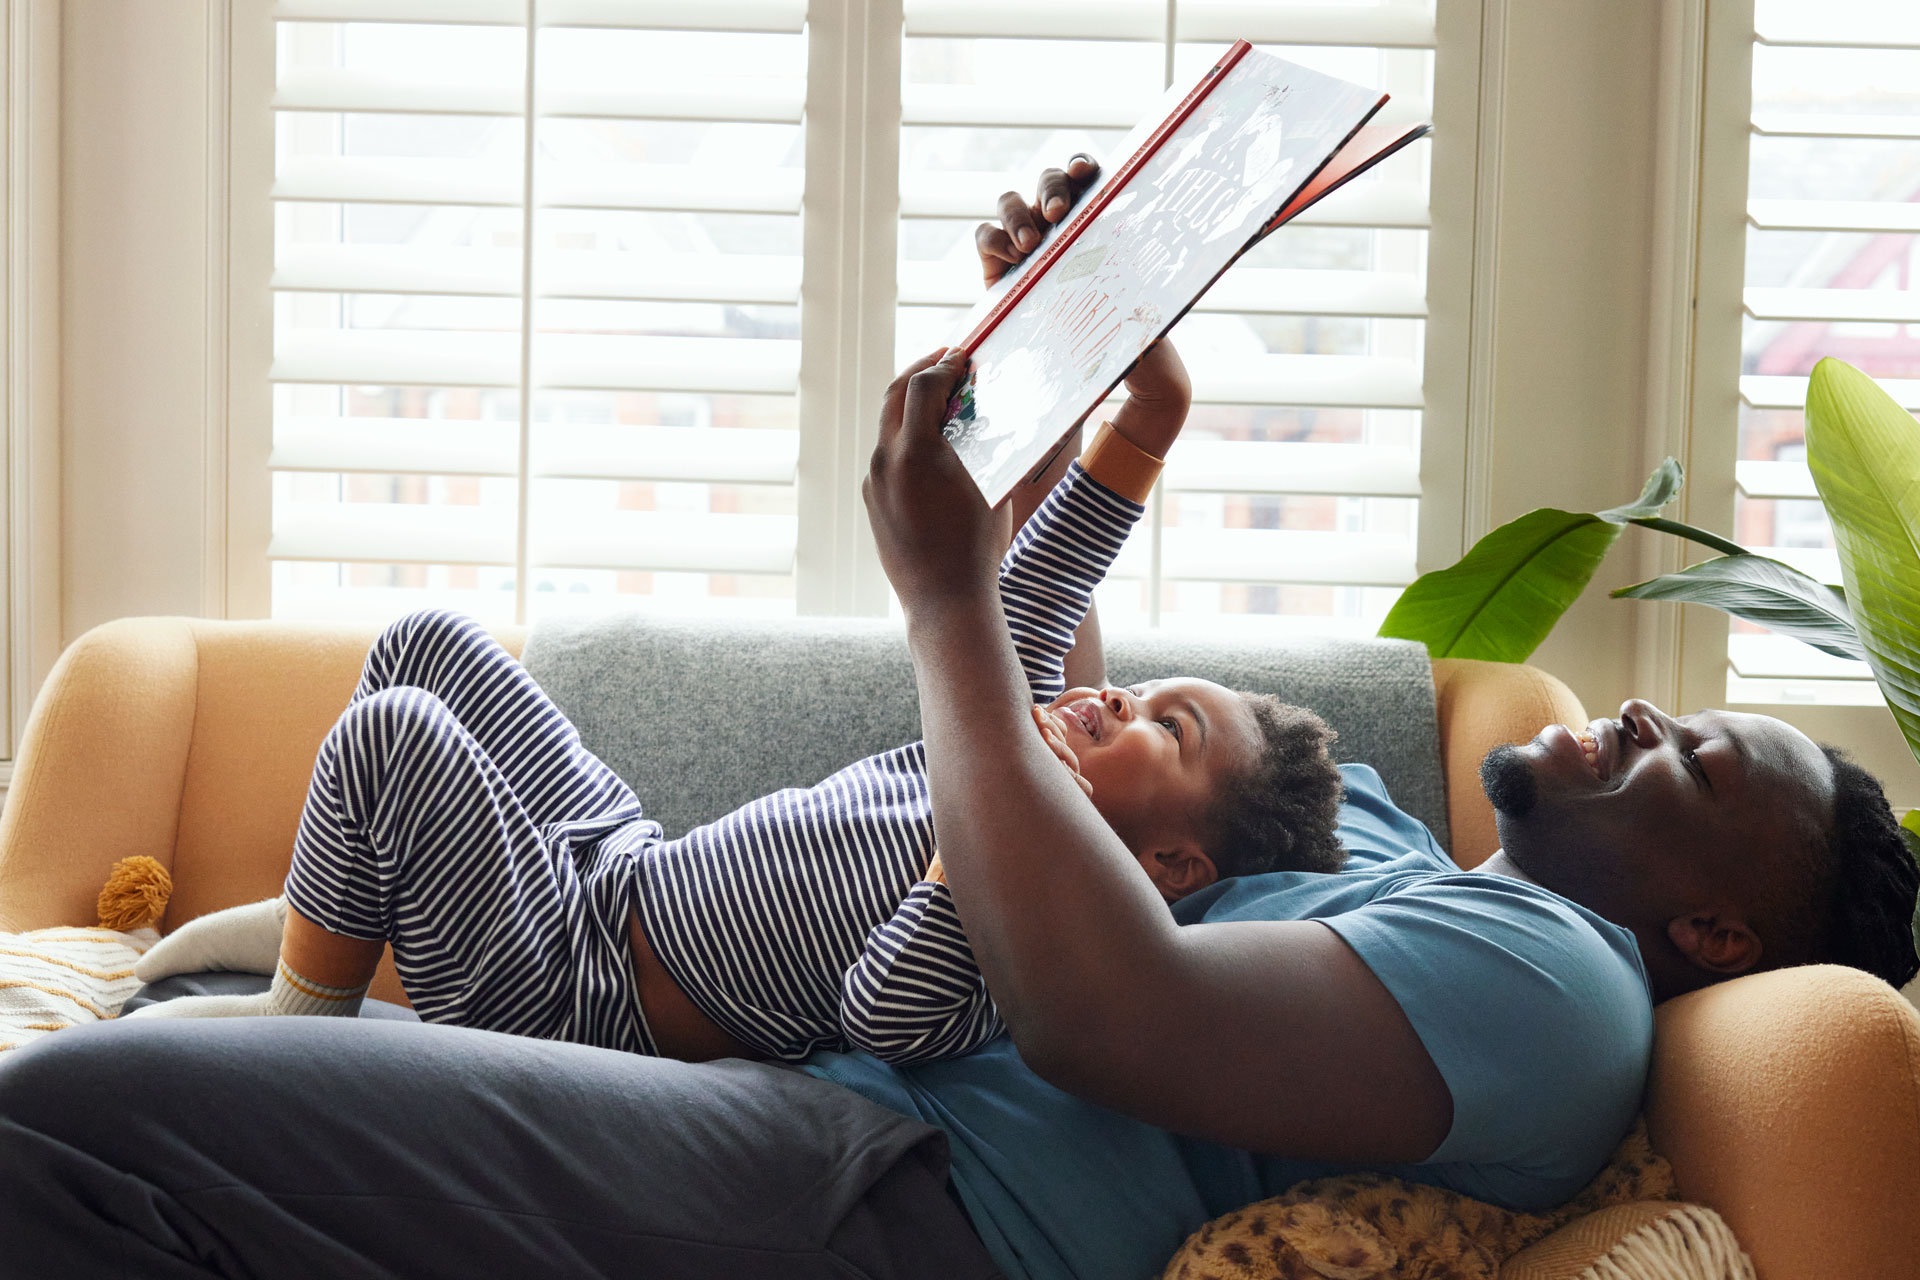 a father and son read a book together, from 'The Moments Economy' Report by John Lewis